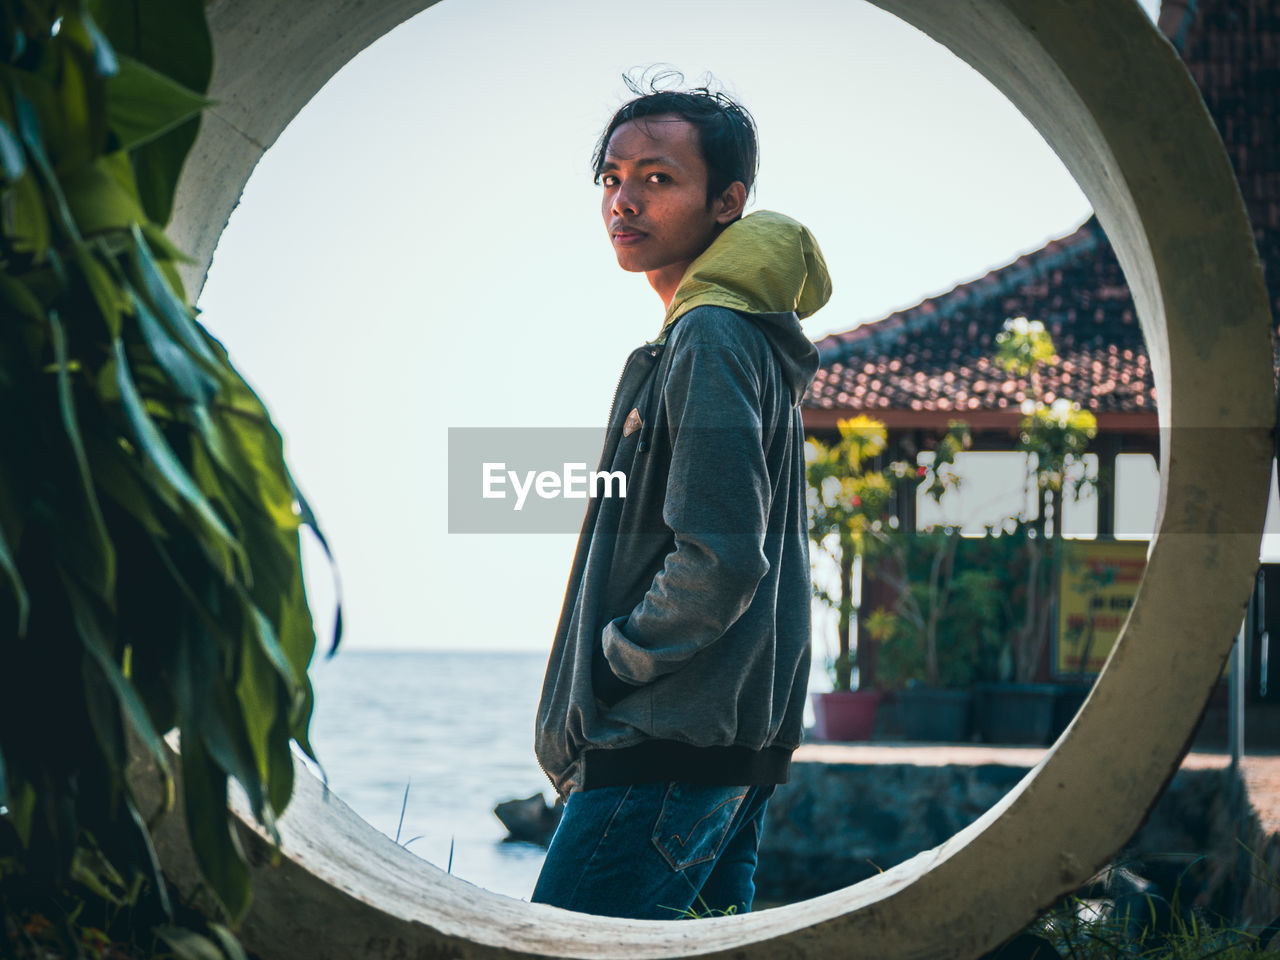 A stylish man in the center of a circle on a house and sea background